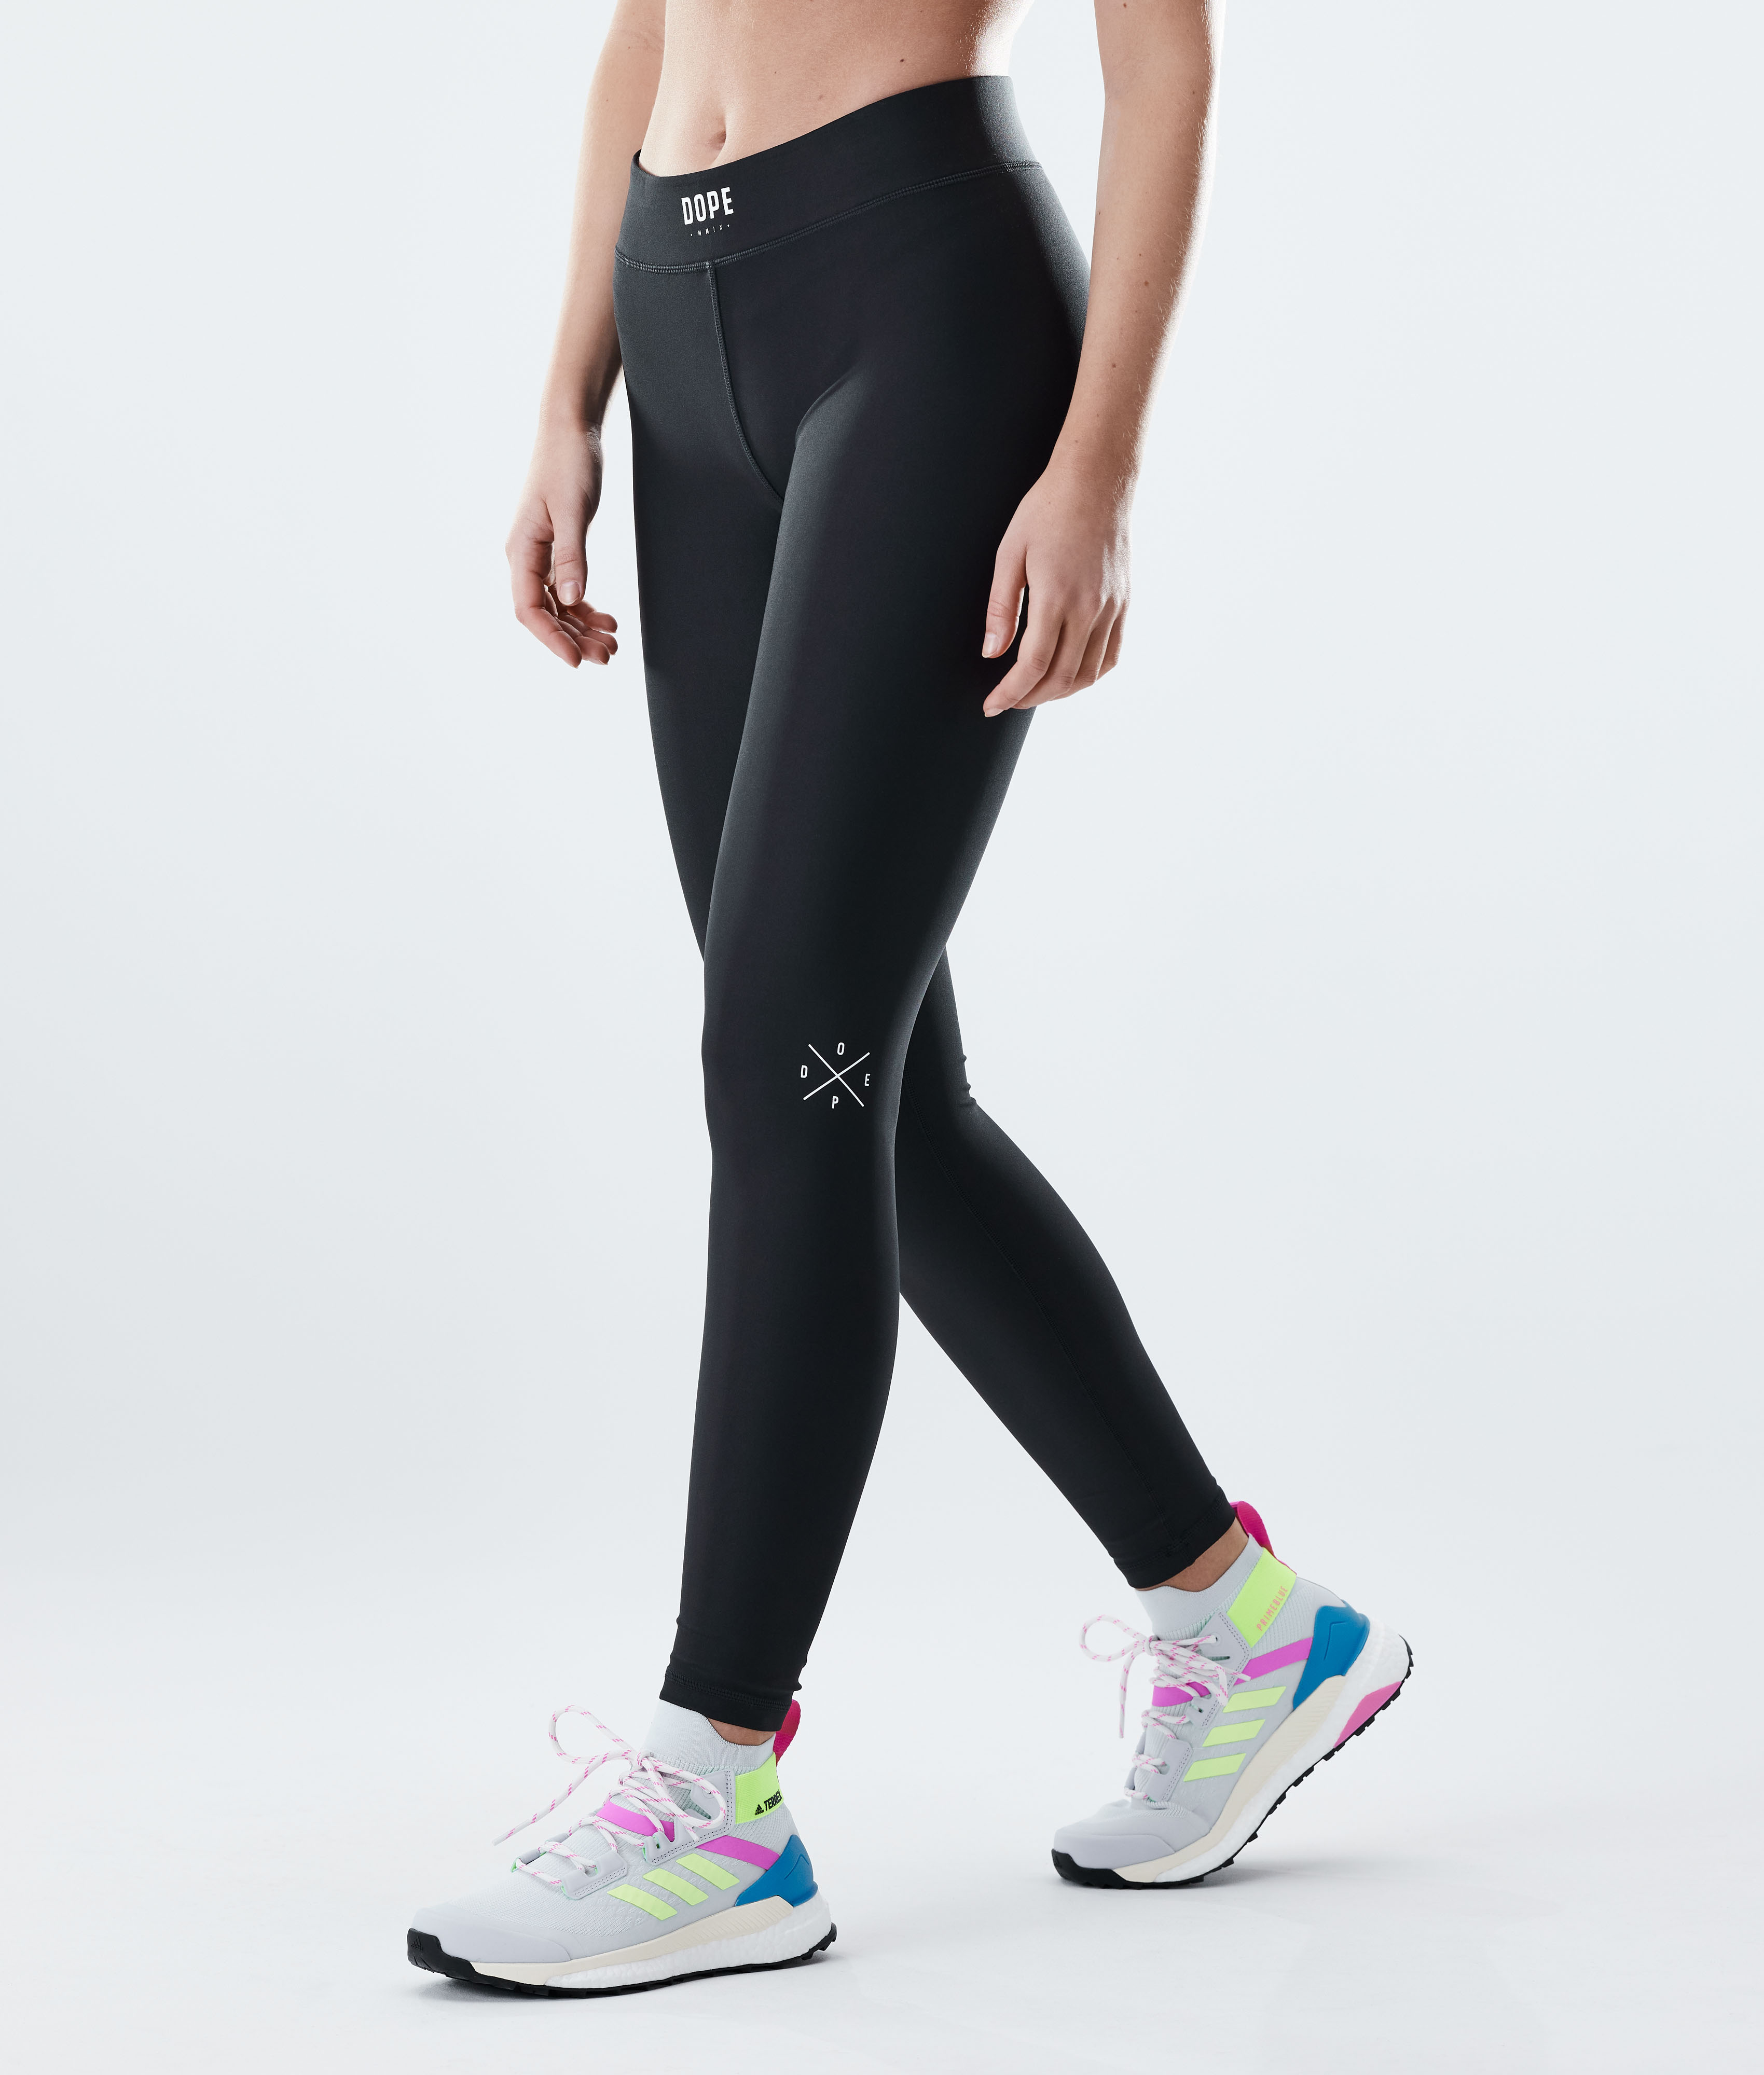 nike women's compression tights | Halifax Shopping Centre